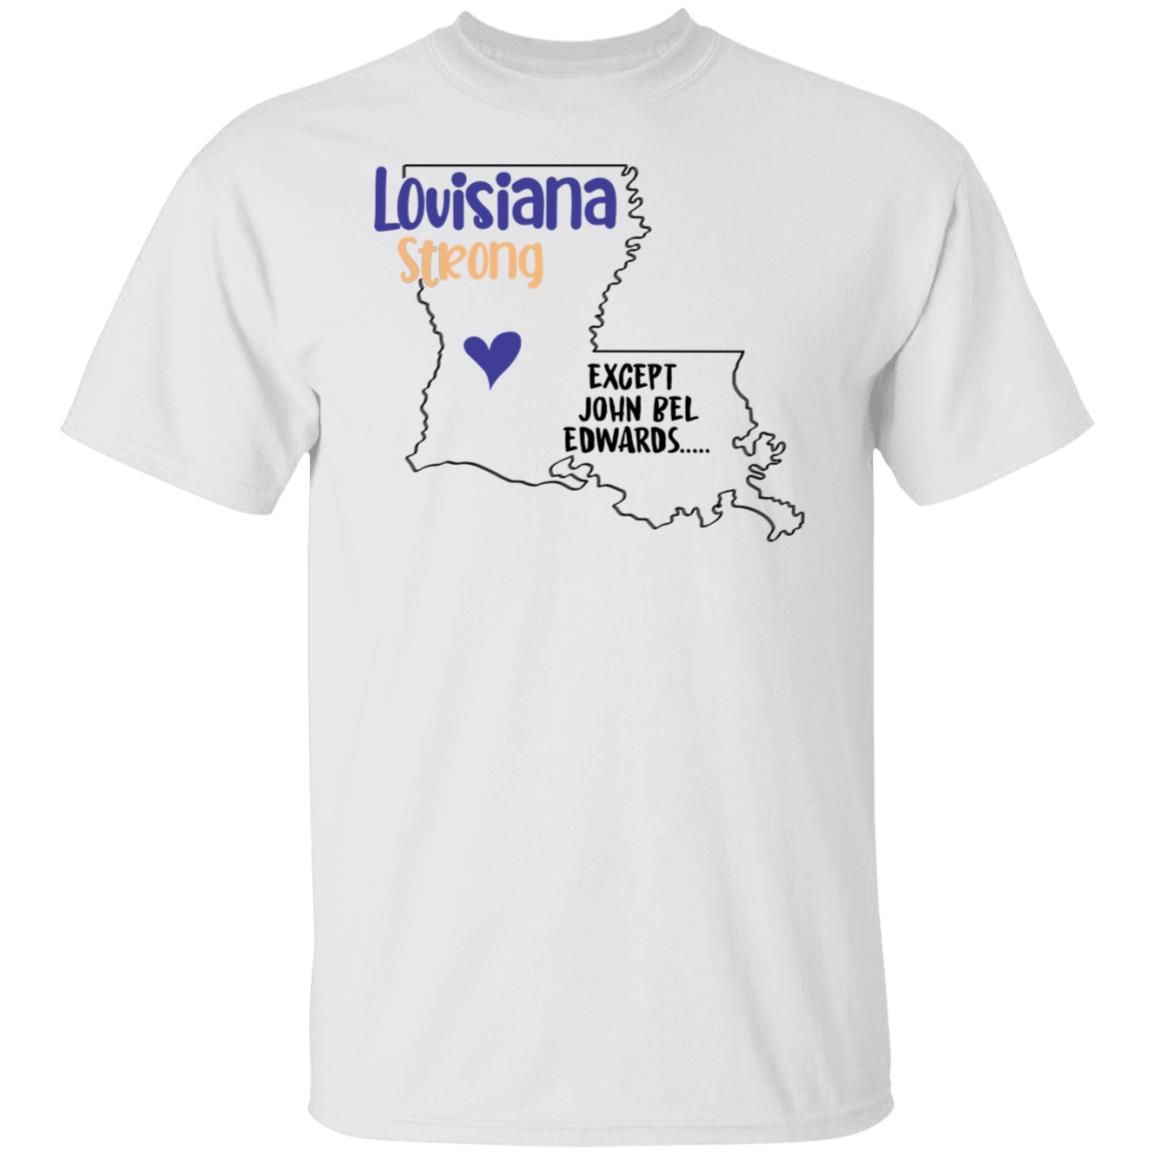 Louisiana strong except John Bel Edwards T-Shirt Style: T-shirt, Color: White